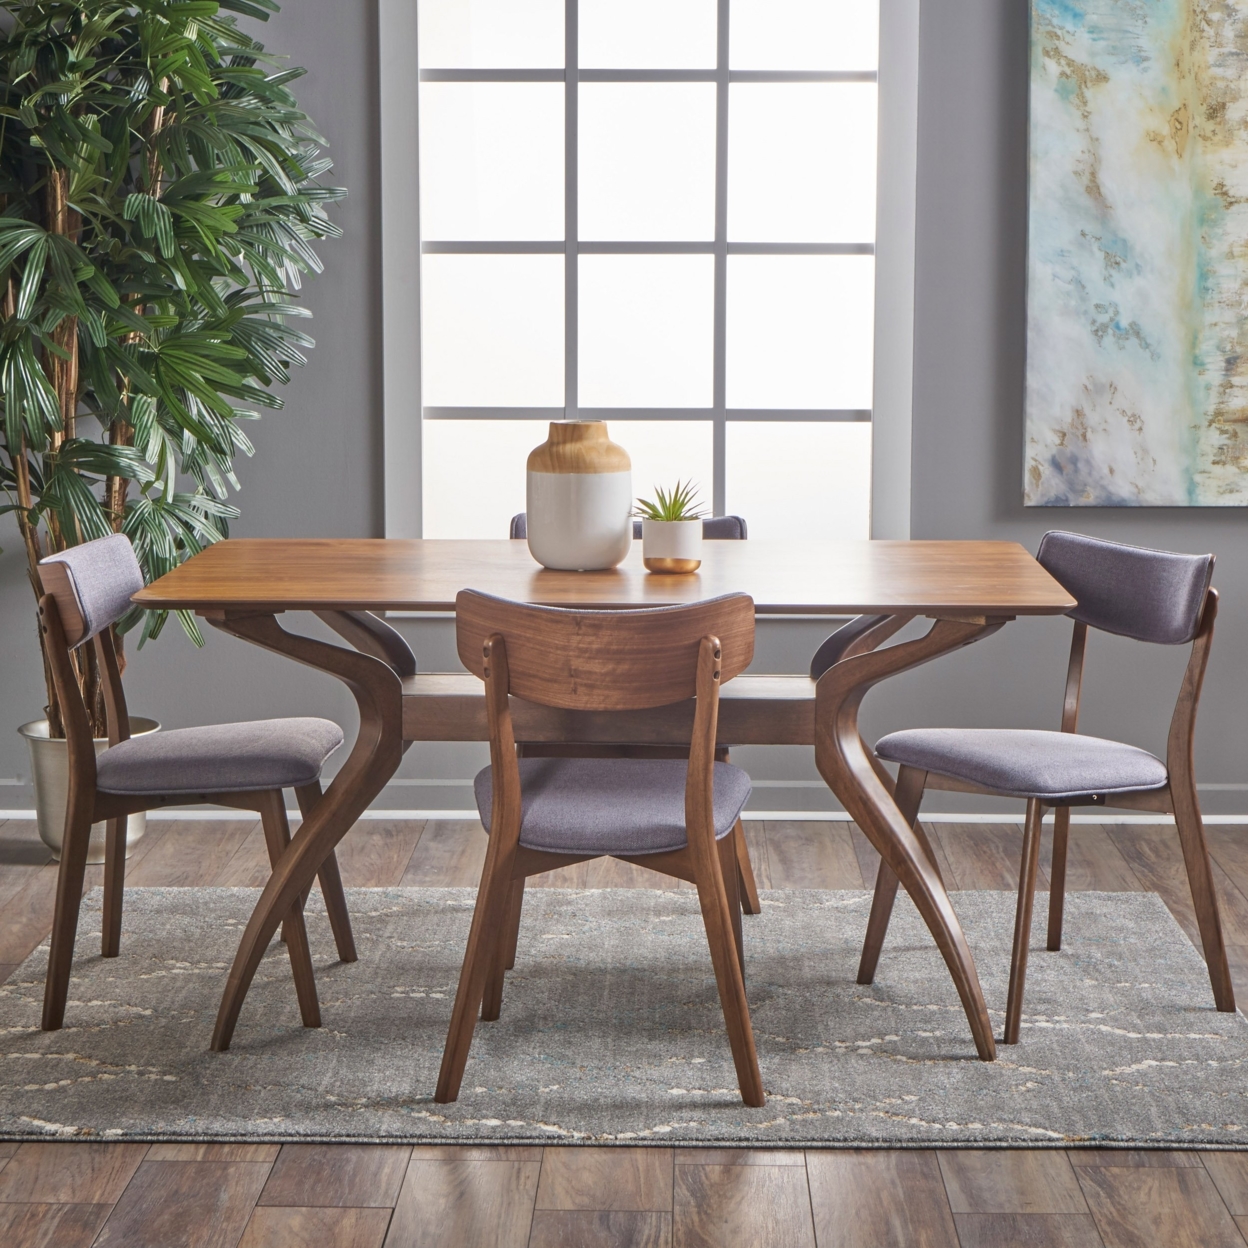 Nerron Mid Century Finished 5 Piece Wood Dining Set With Fabric Chairs - Dark Gray